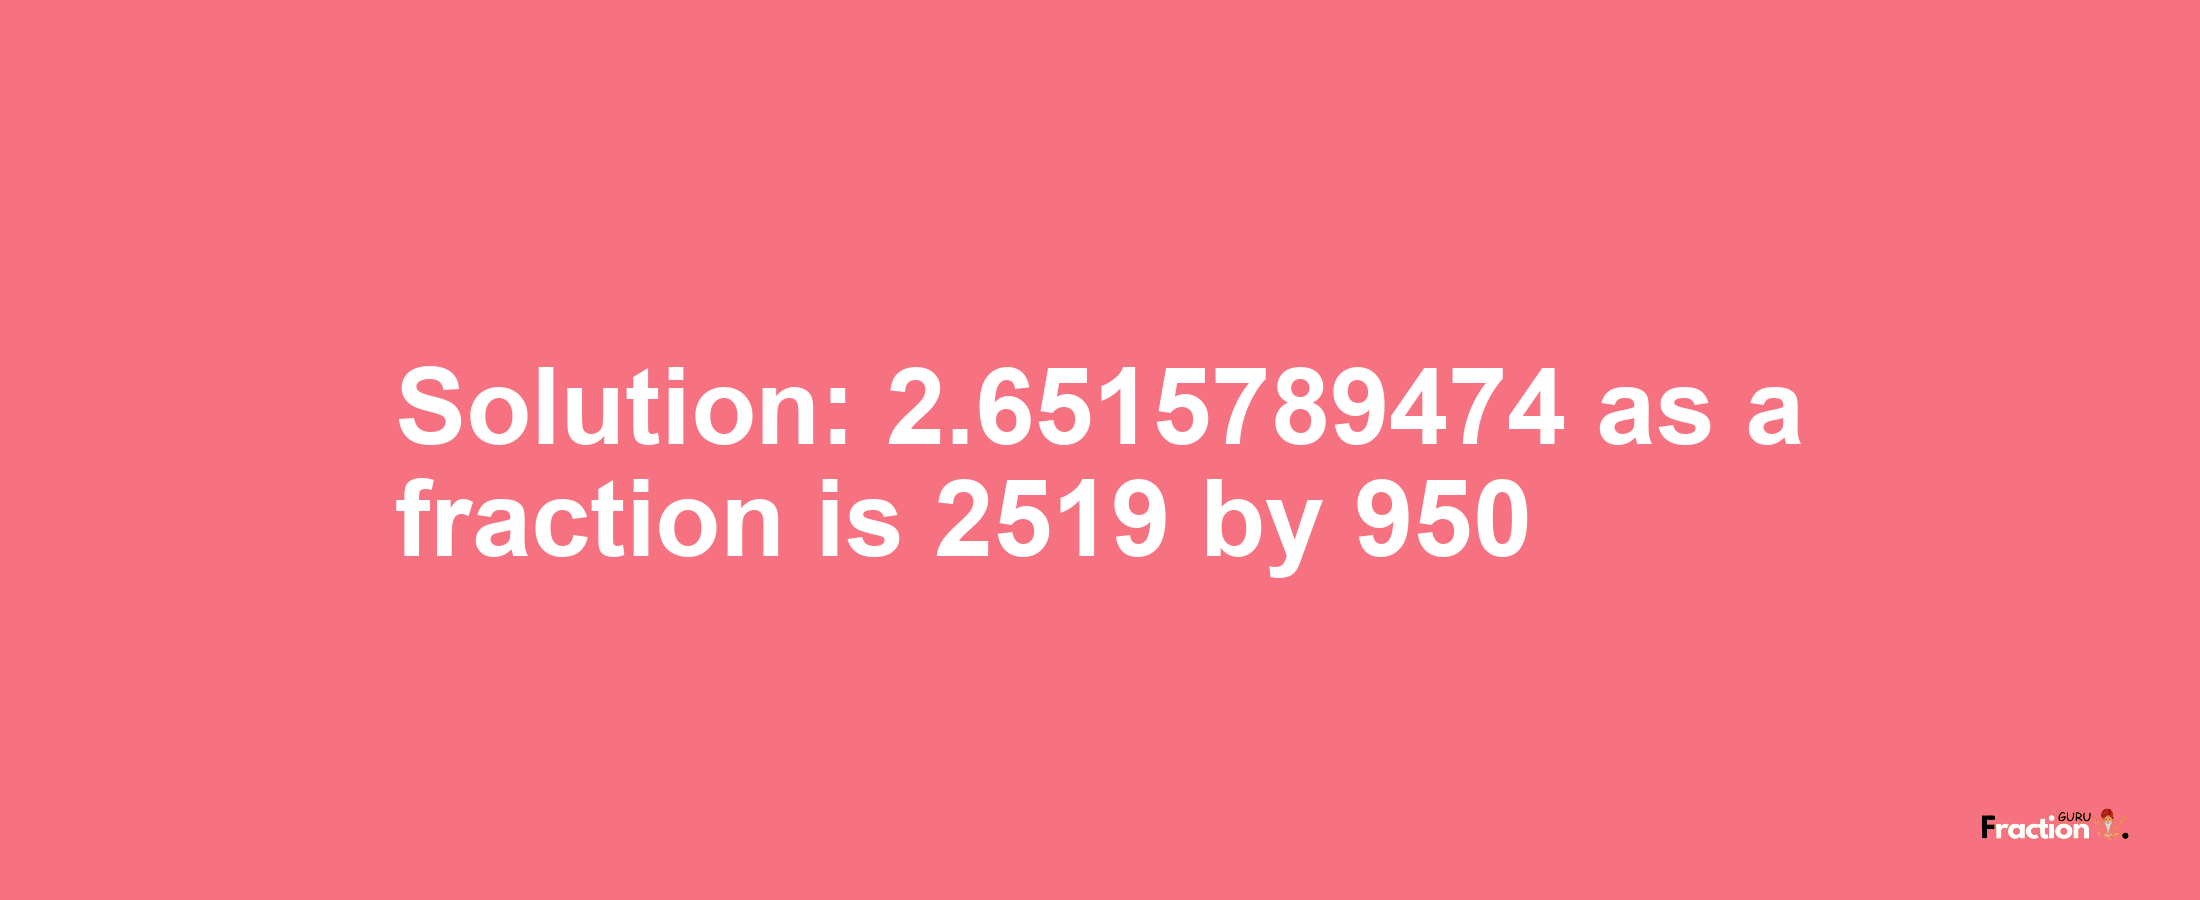 Solution:2.6515789474 as a fraction is 2519/950